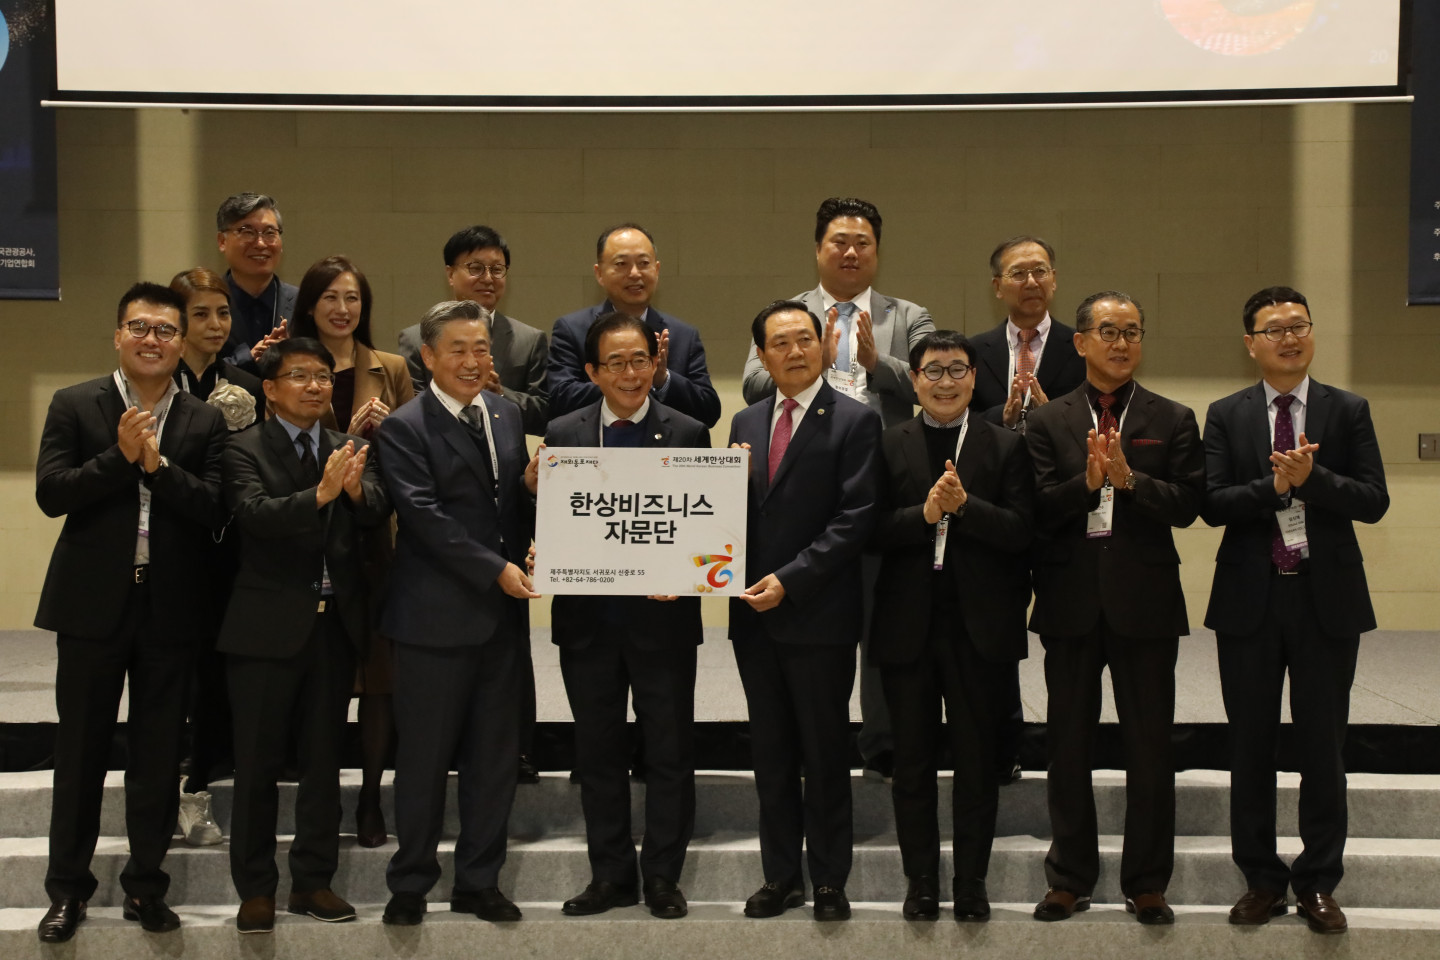 Advisors group and Chairman Kim Sung-kon congratulating the launching ceremony of the Korean Businesspeople Advisors Group